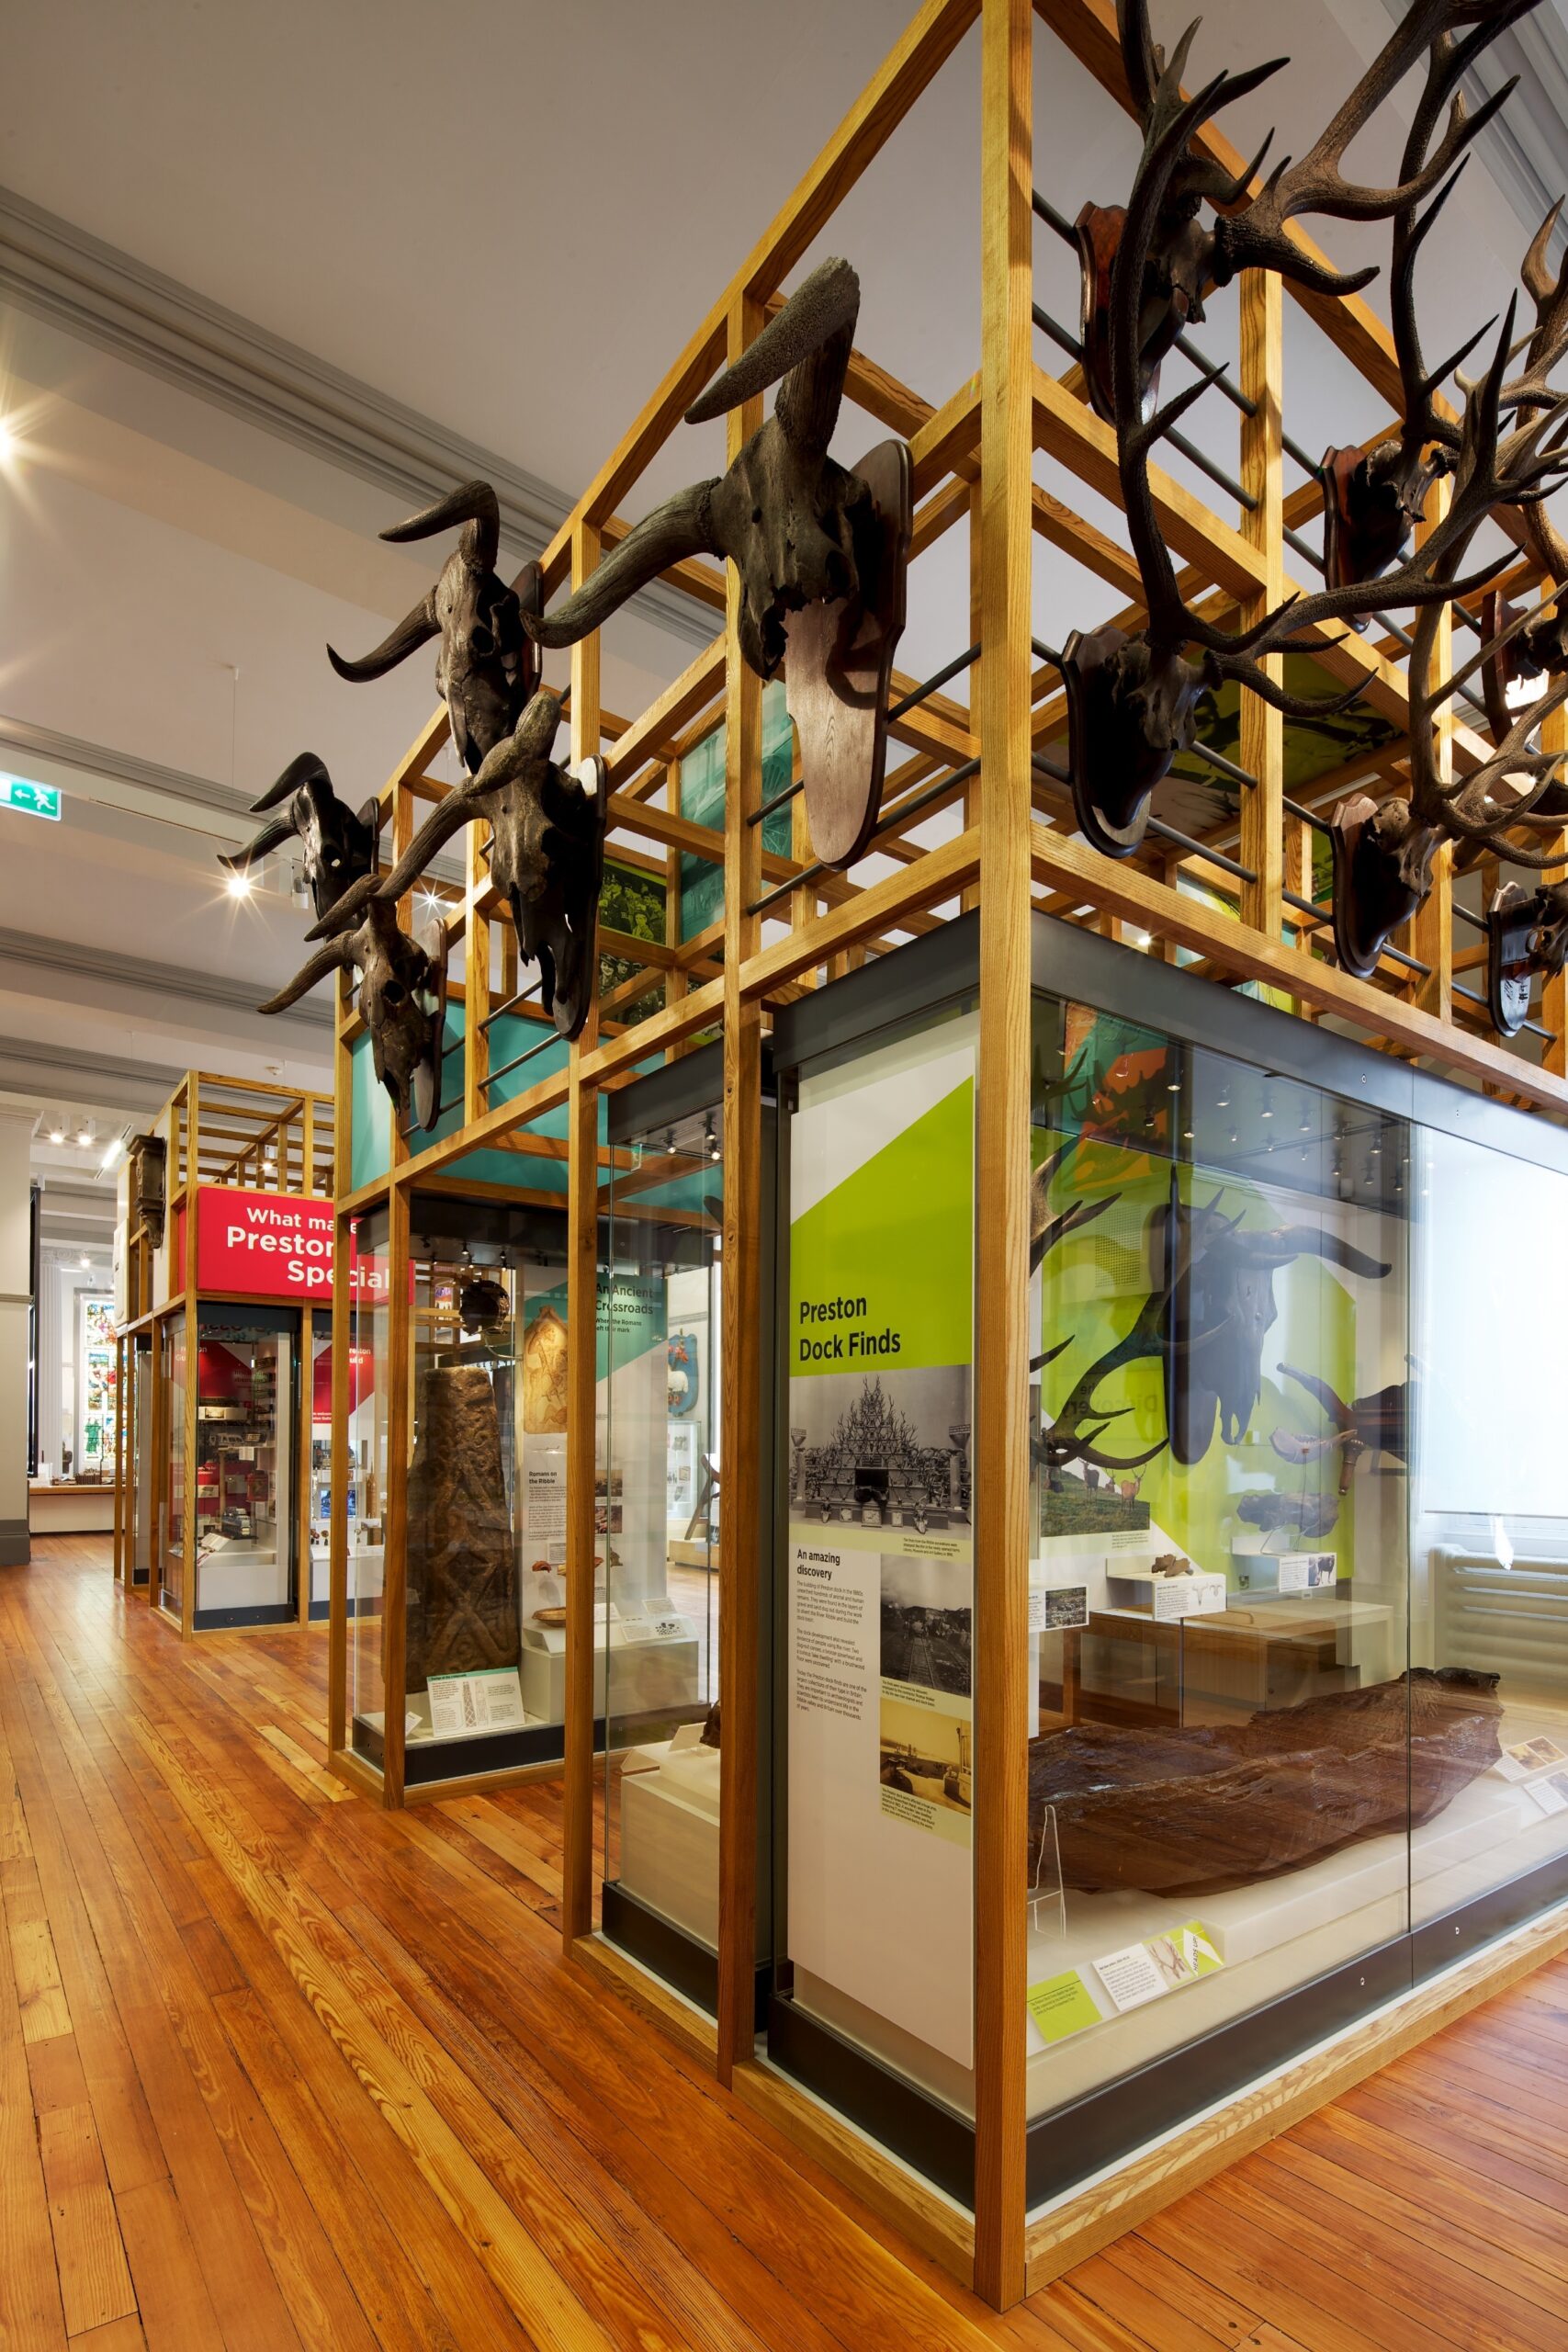 Image of The Discover Preston Gallery with animal skulls hung from the ceeling.